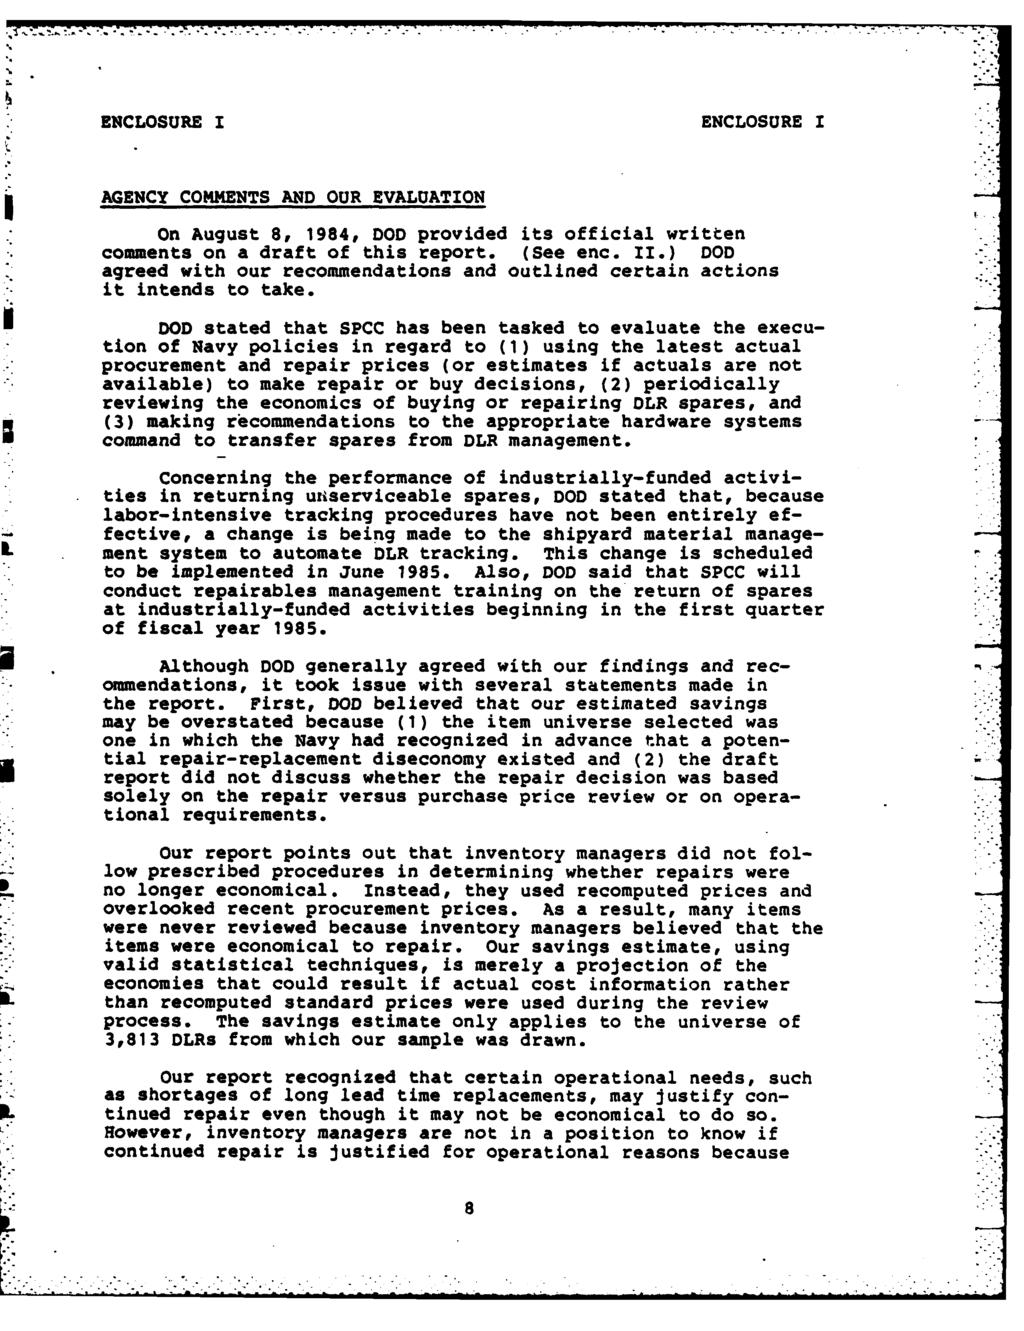 ENCLOSURE I ENCLOSURE I AGENCY COMMENTS AND OUR EVALUATION On August 8, 1984, DOD provided its official written comments on a draft of this report. (See enc. II.